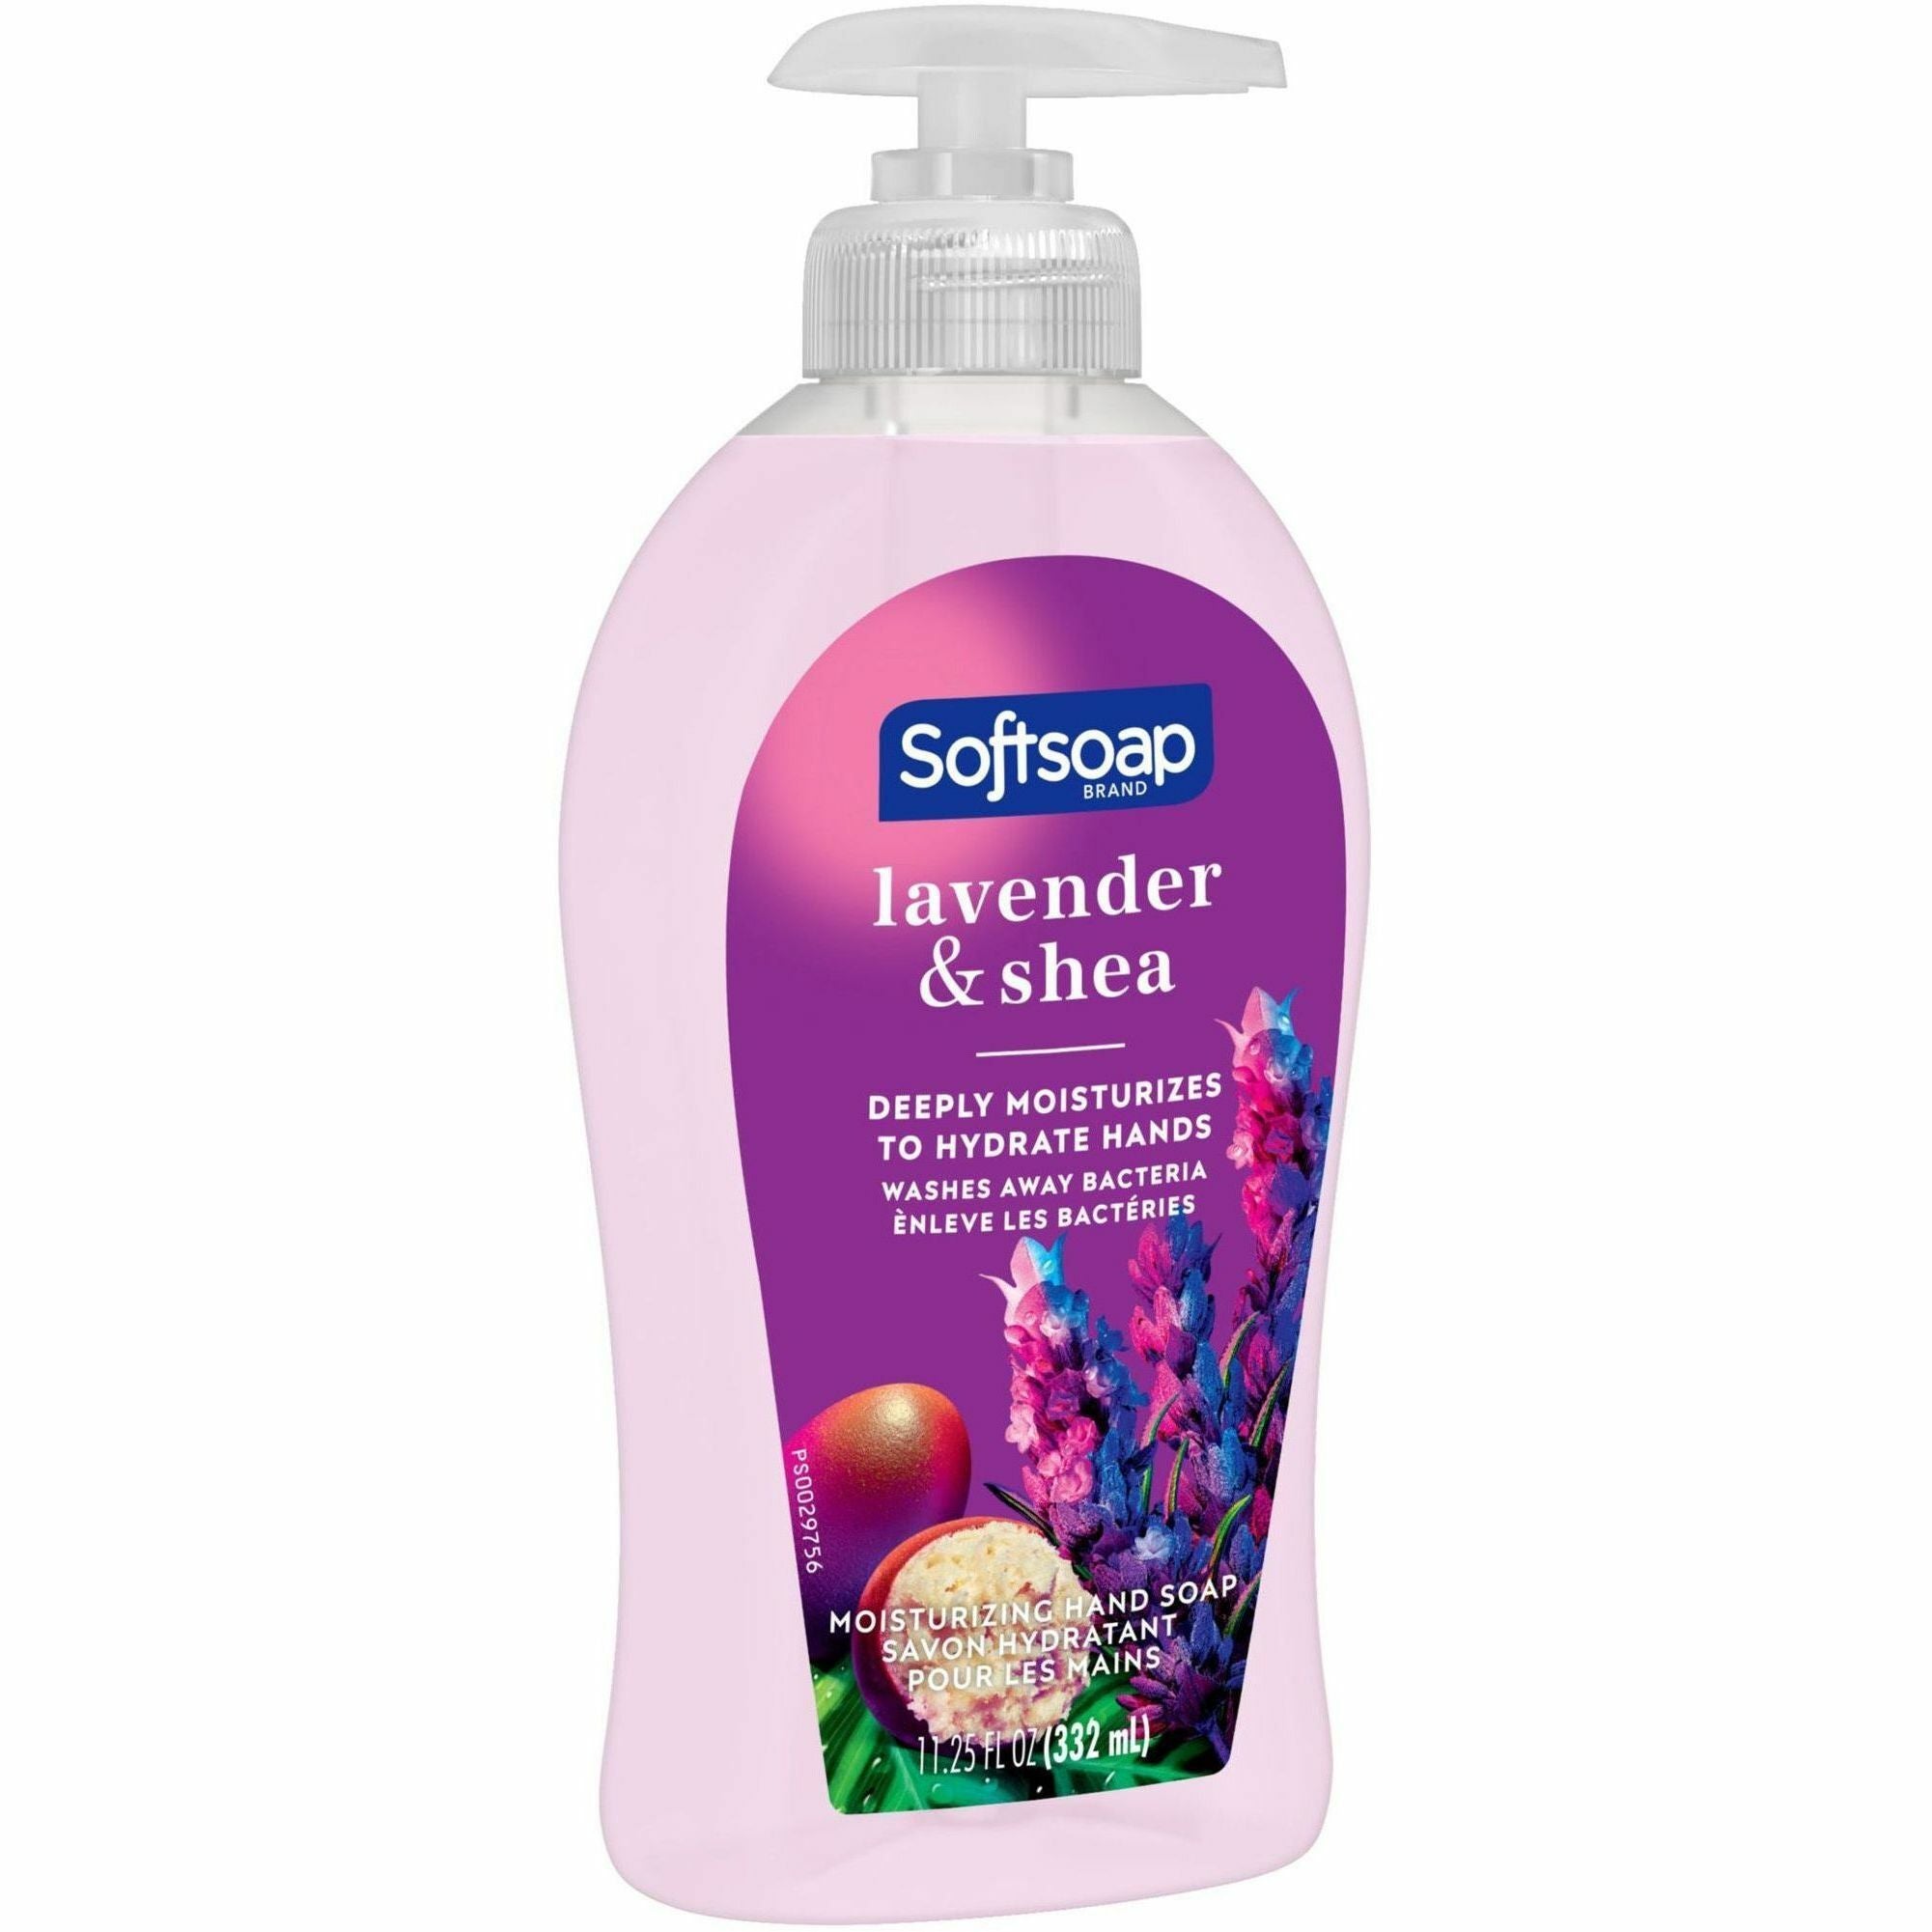 softsoap-lavender-hand-soap-lavender-&-shea-butter-scentfor-113-fl-oz-3327-ml-pump-bottle-dispenser-bacteria-remover-dirt-remover-hand-skin-moisturizing-purple-refillable-recyclable-paraben-free-phthalate-free-biodegradable_cpcus07058a - 4